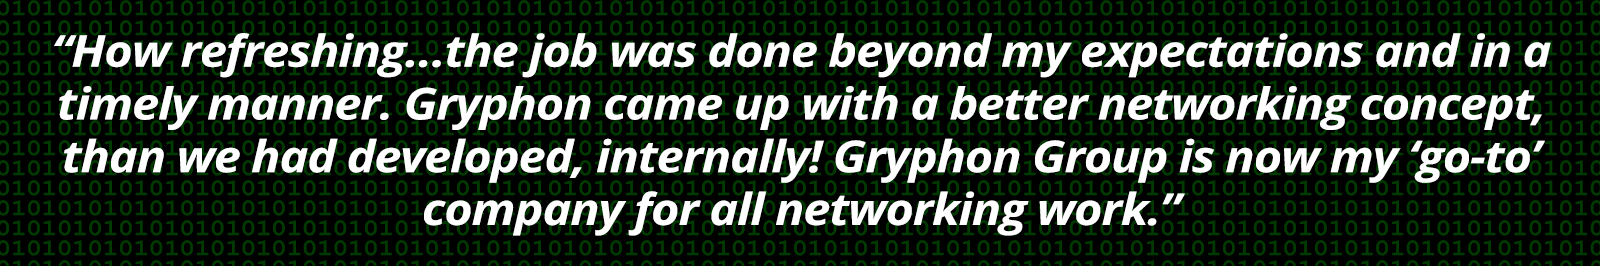 How refreshing…the job was done beyond my expectations and in a timely manner. Gryphon came up with a better networking concept, than we had developed, internally! Gryphon Group is now my ‘go-to’ company for all networking work.